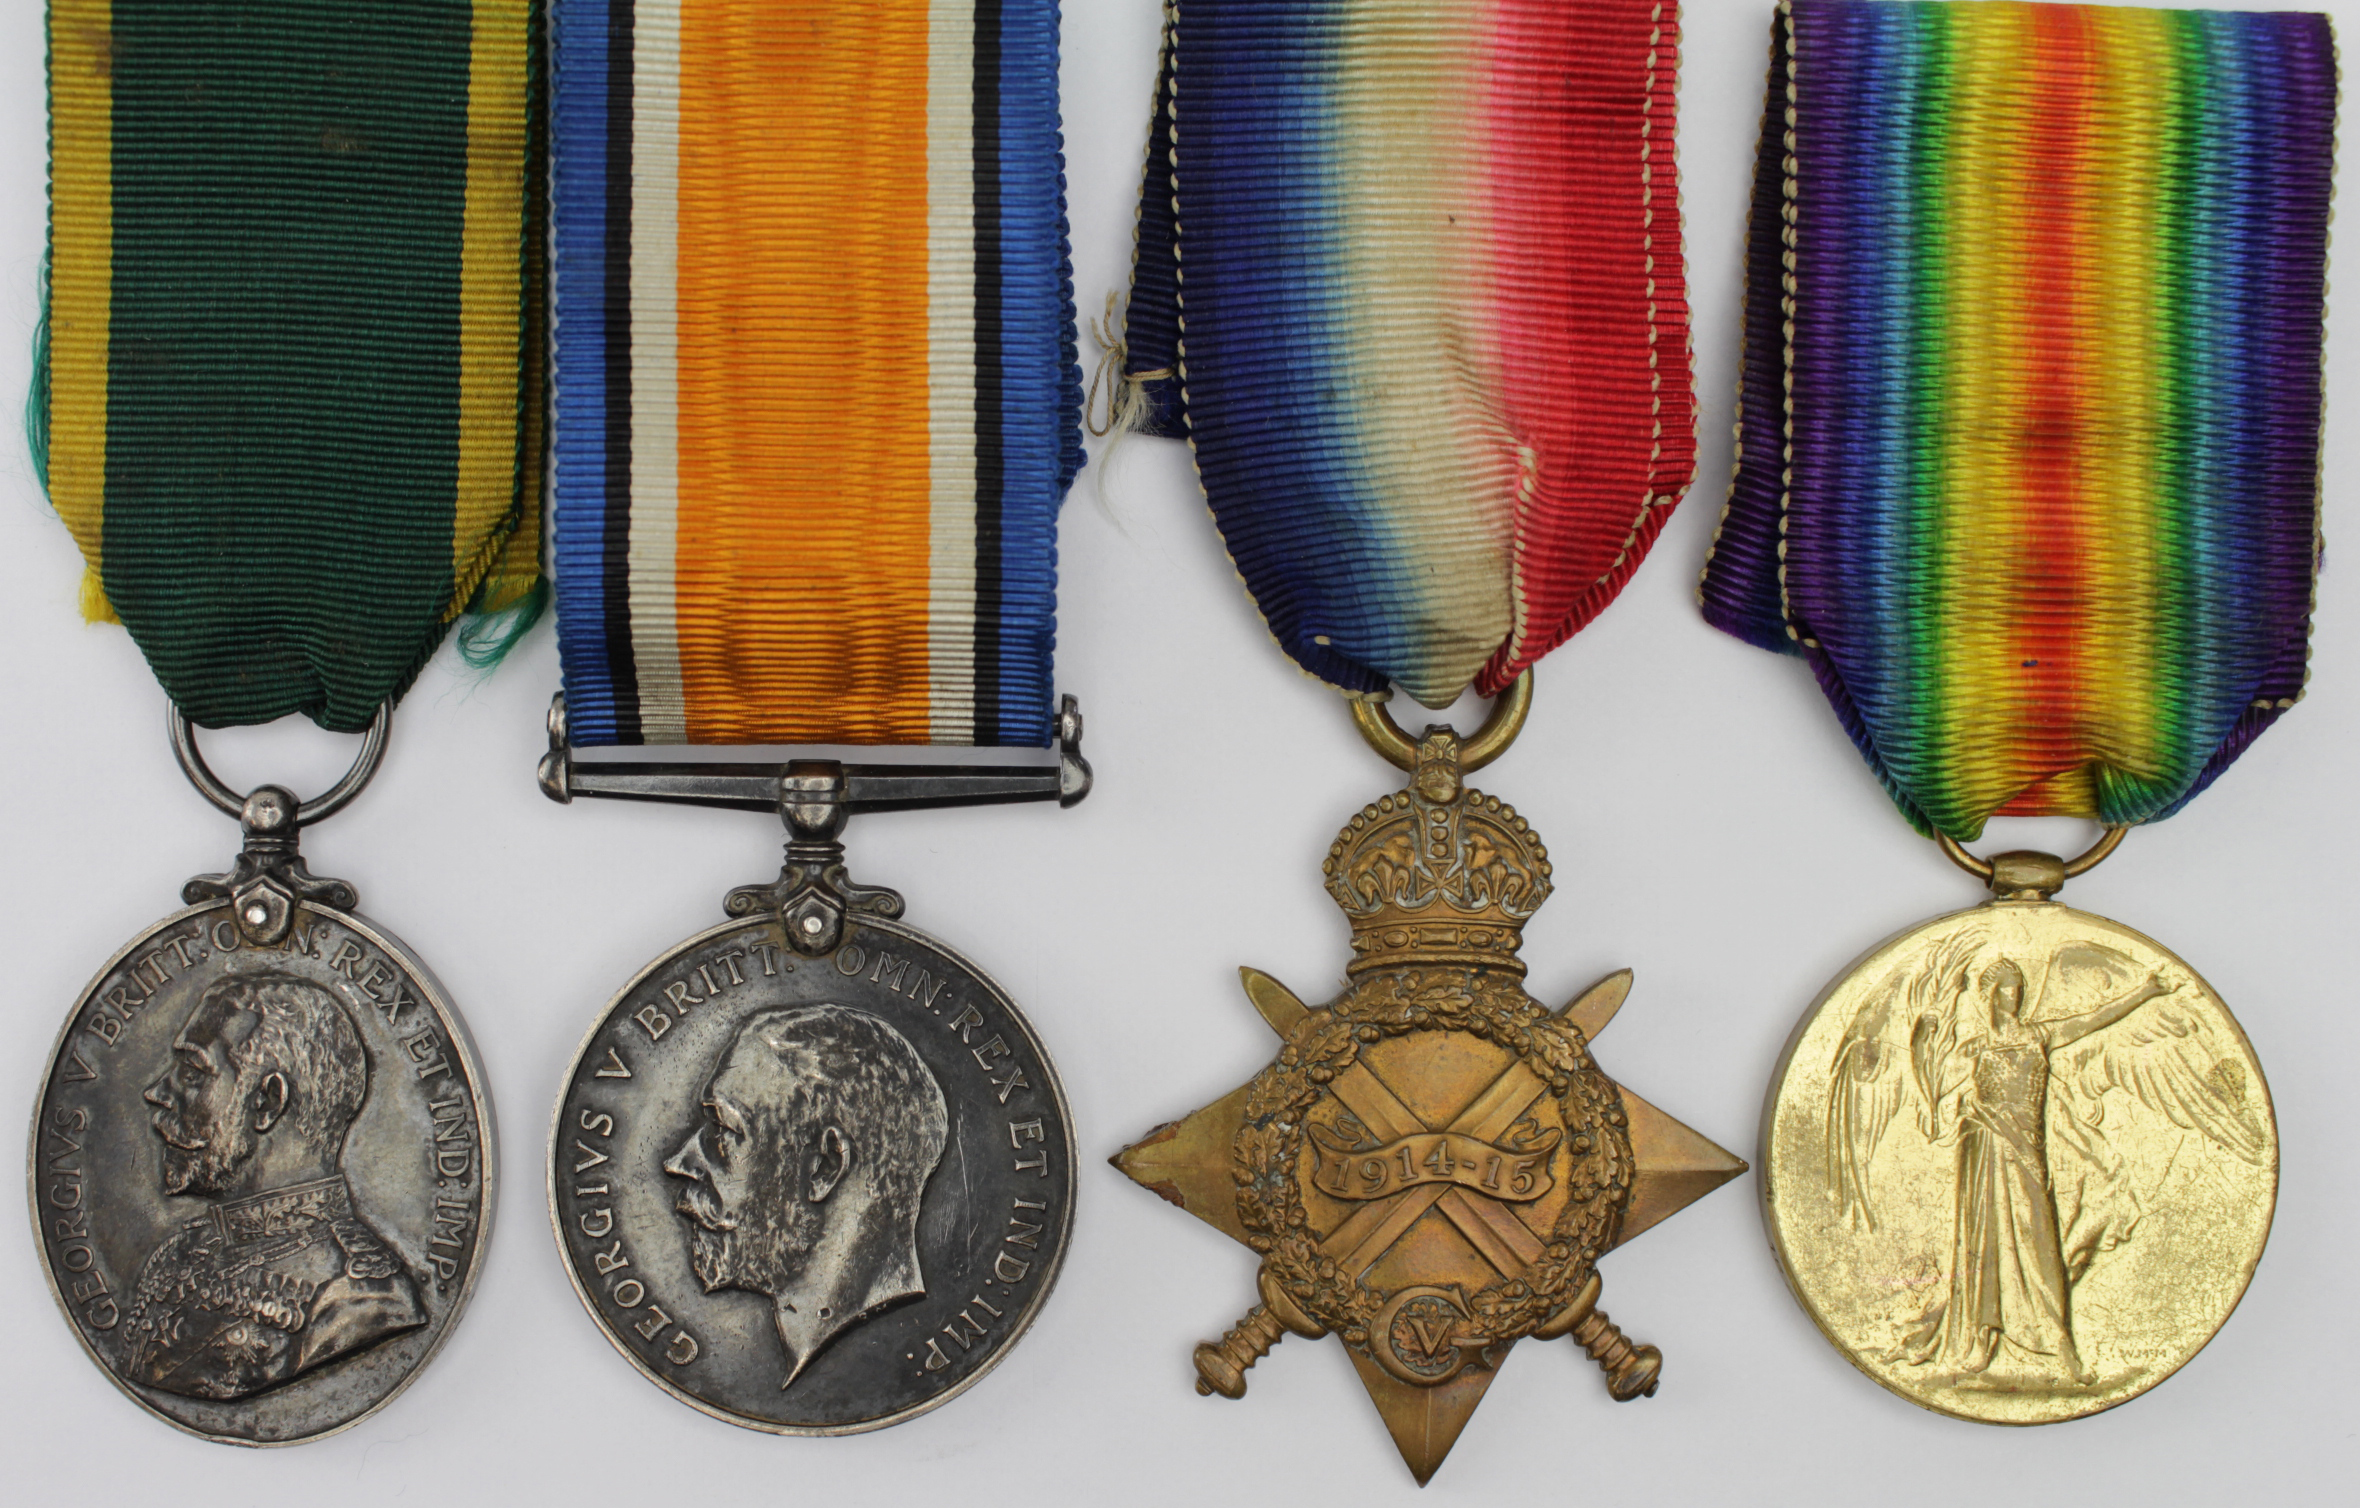 1915 Star trio to 1625 Pte A J King RAMC, with Territorial Efficiency Medal GV named (7335555 Pte